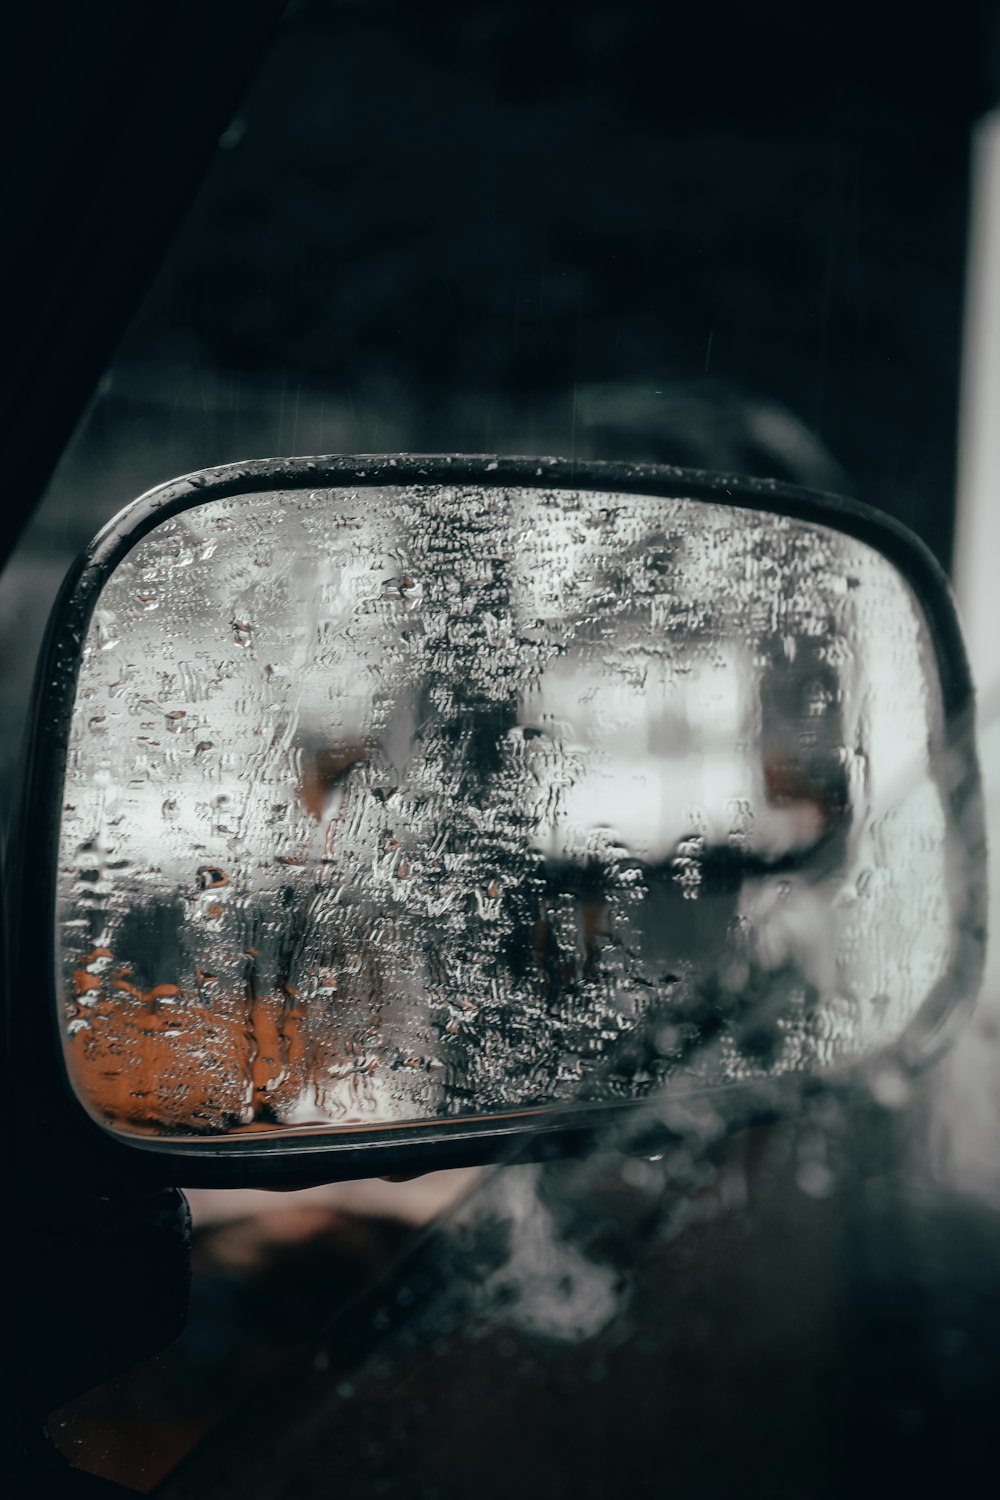 car side mirror with water droplets